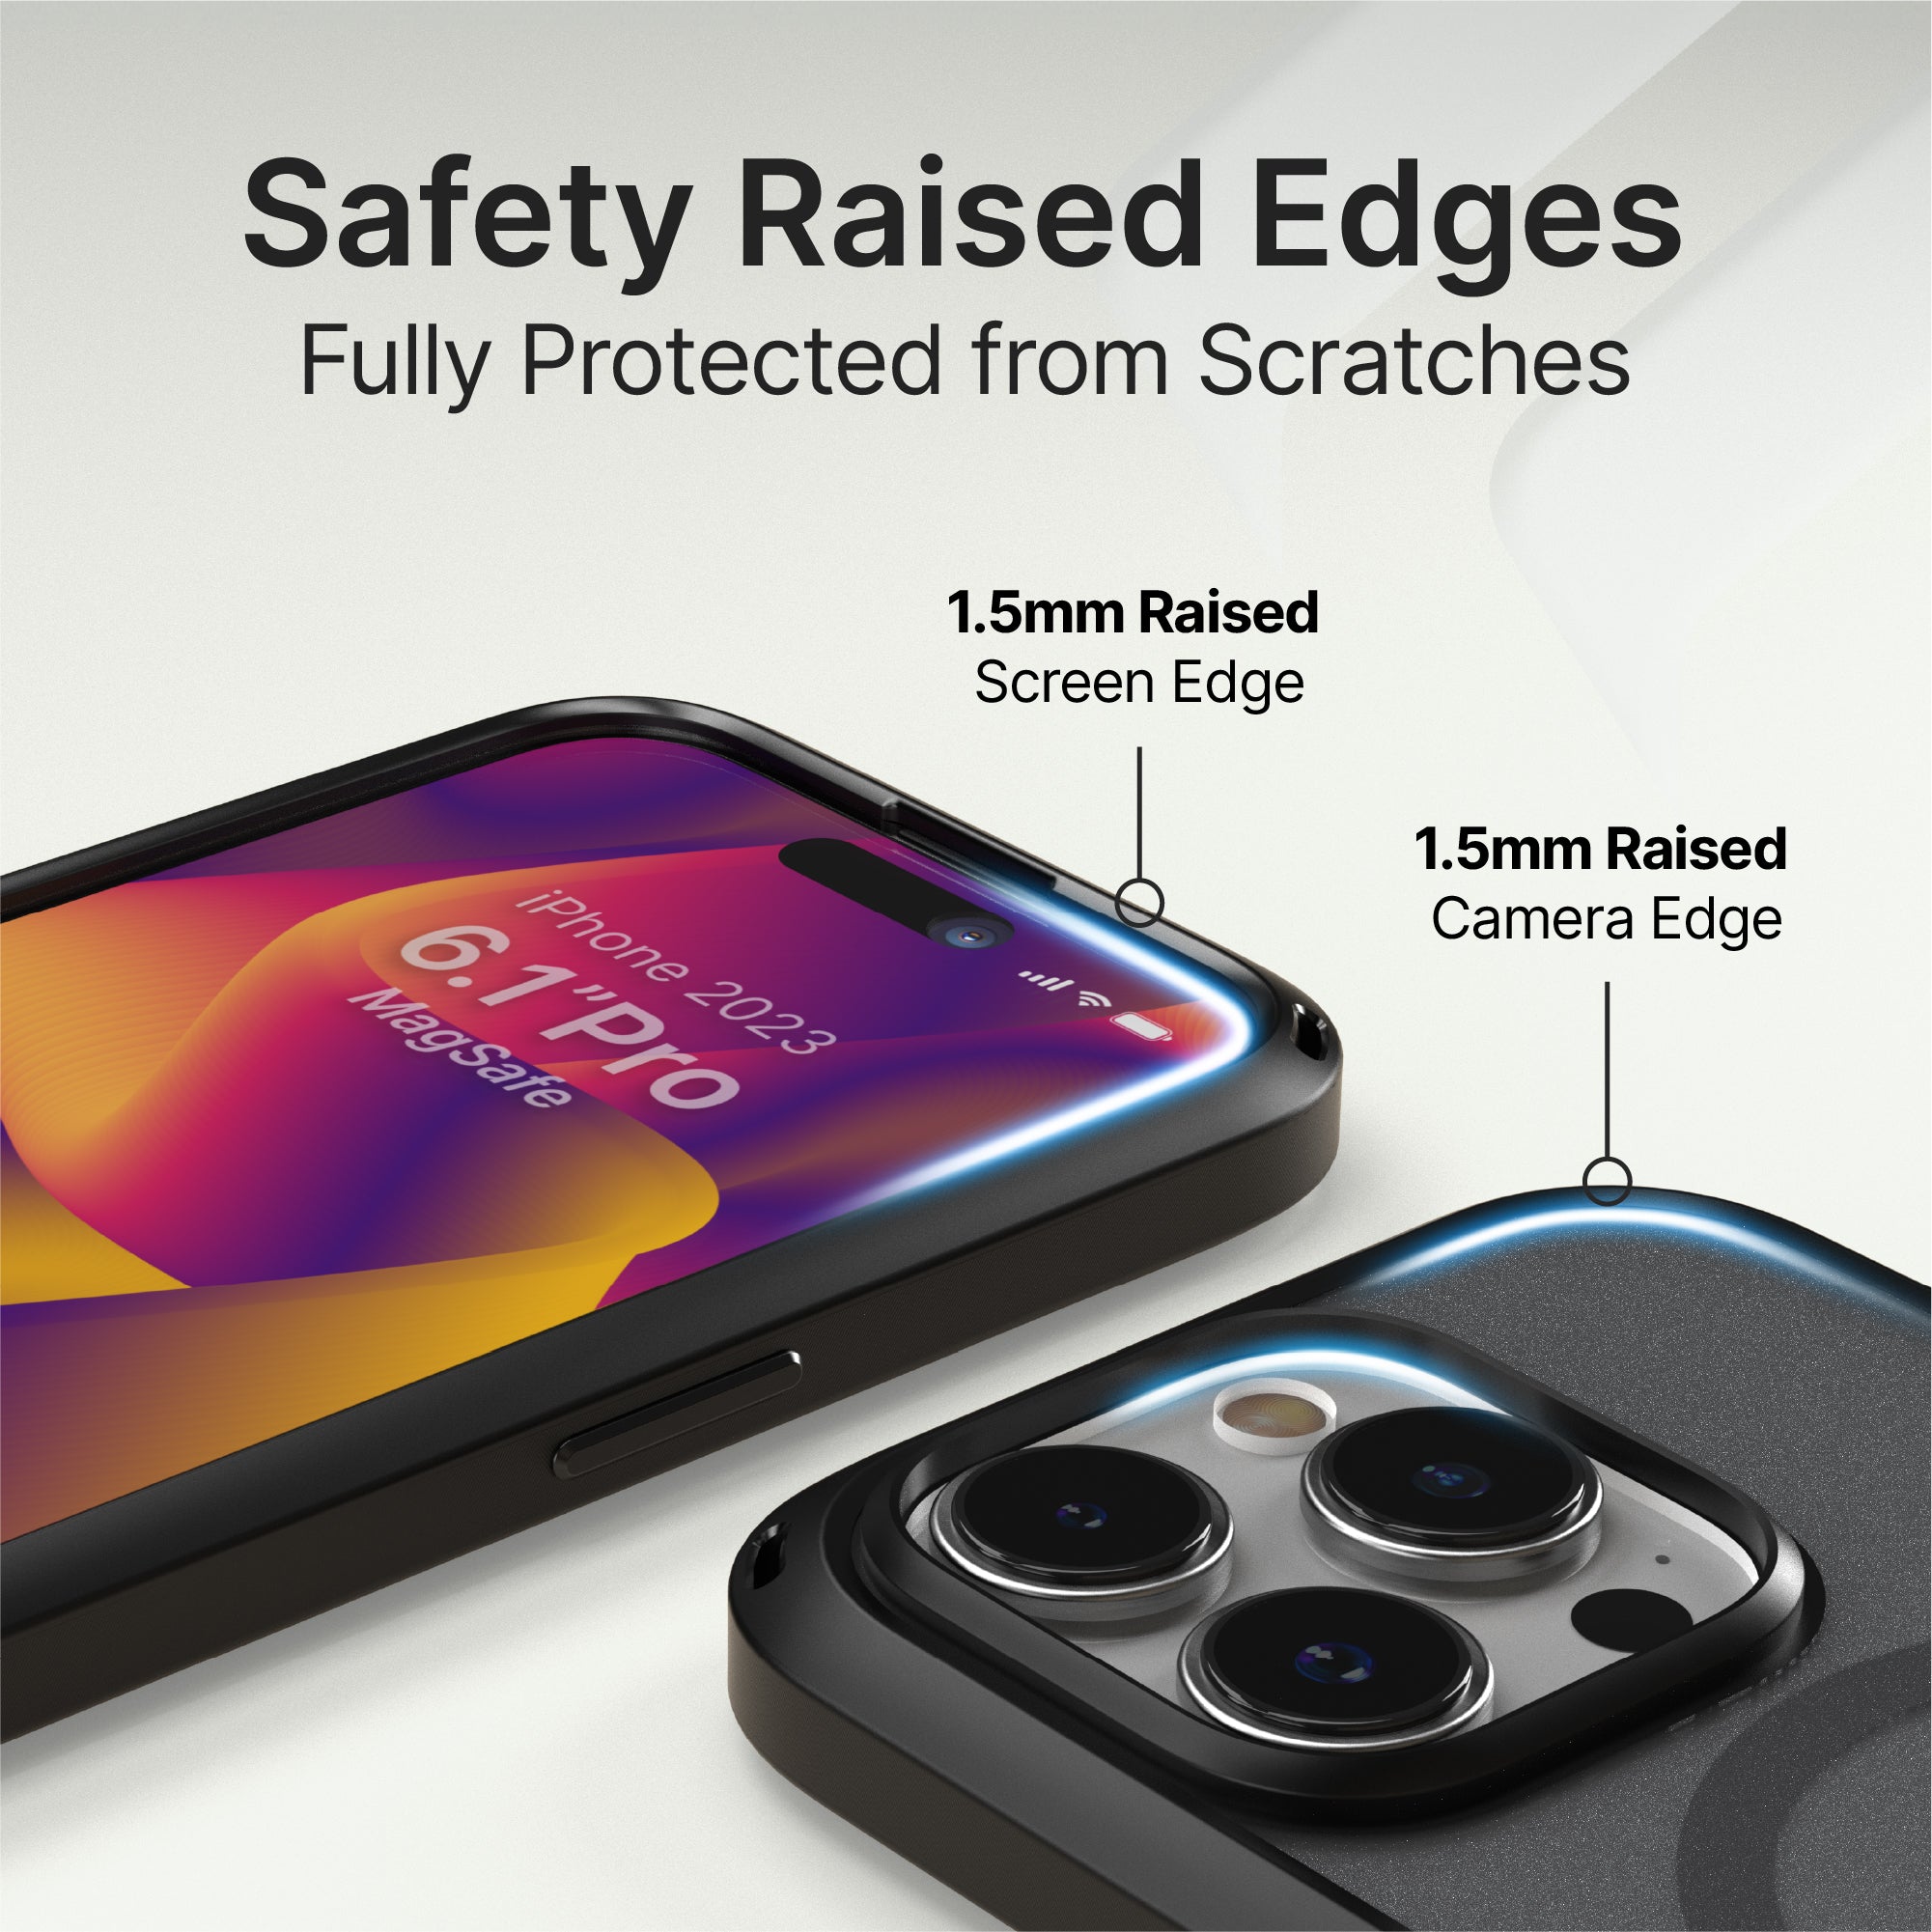 catalyst iphone 15 series influence case magsafe compatible stealth black for iphone 15 pro max showing the safety raised edges for camera and screen text reads safety raised edges fully protected from scratches 1.5mm raised screen edge 1.5mm raised camera edge